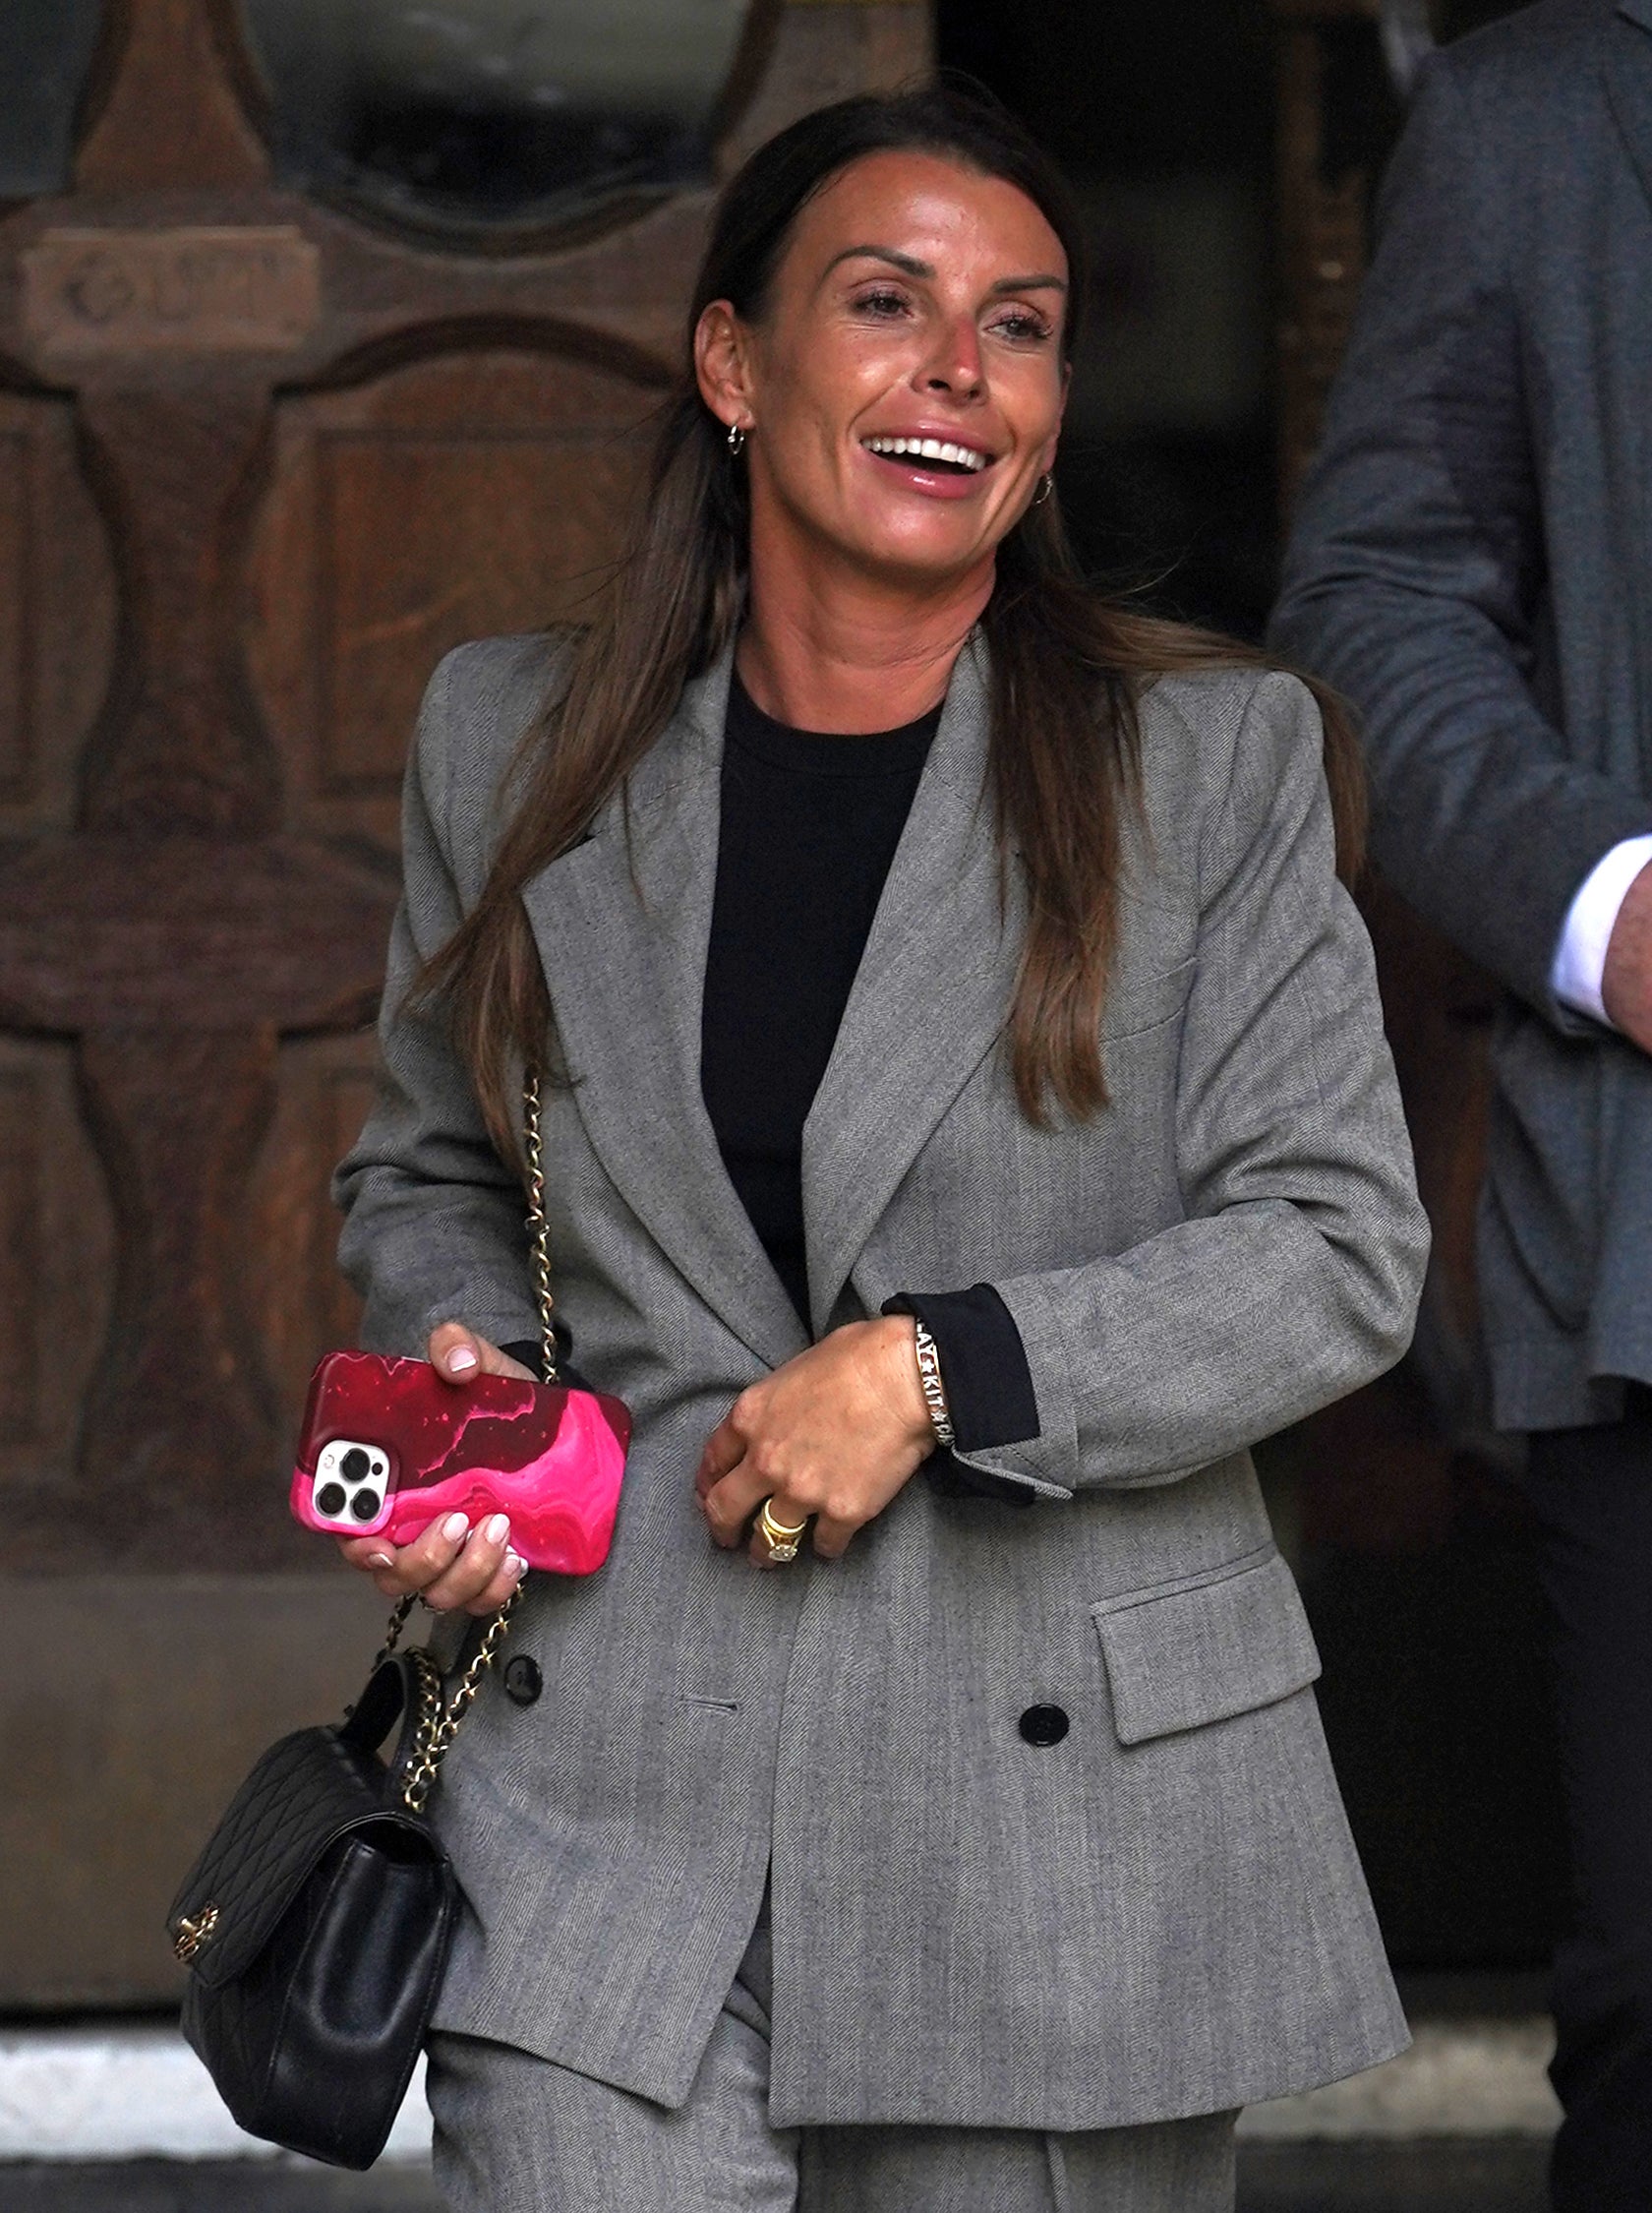 Coleen Rooney leaves the Royal Courts of Justice (Yui Mok/PA)